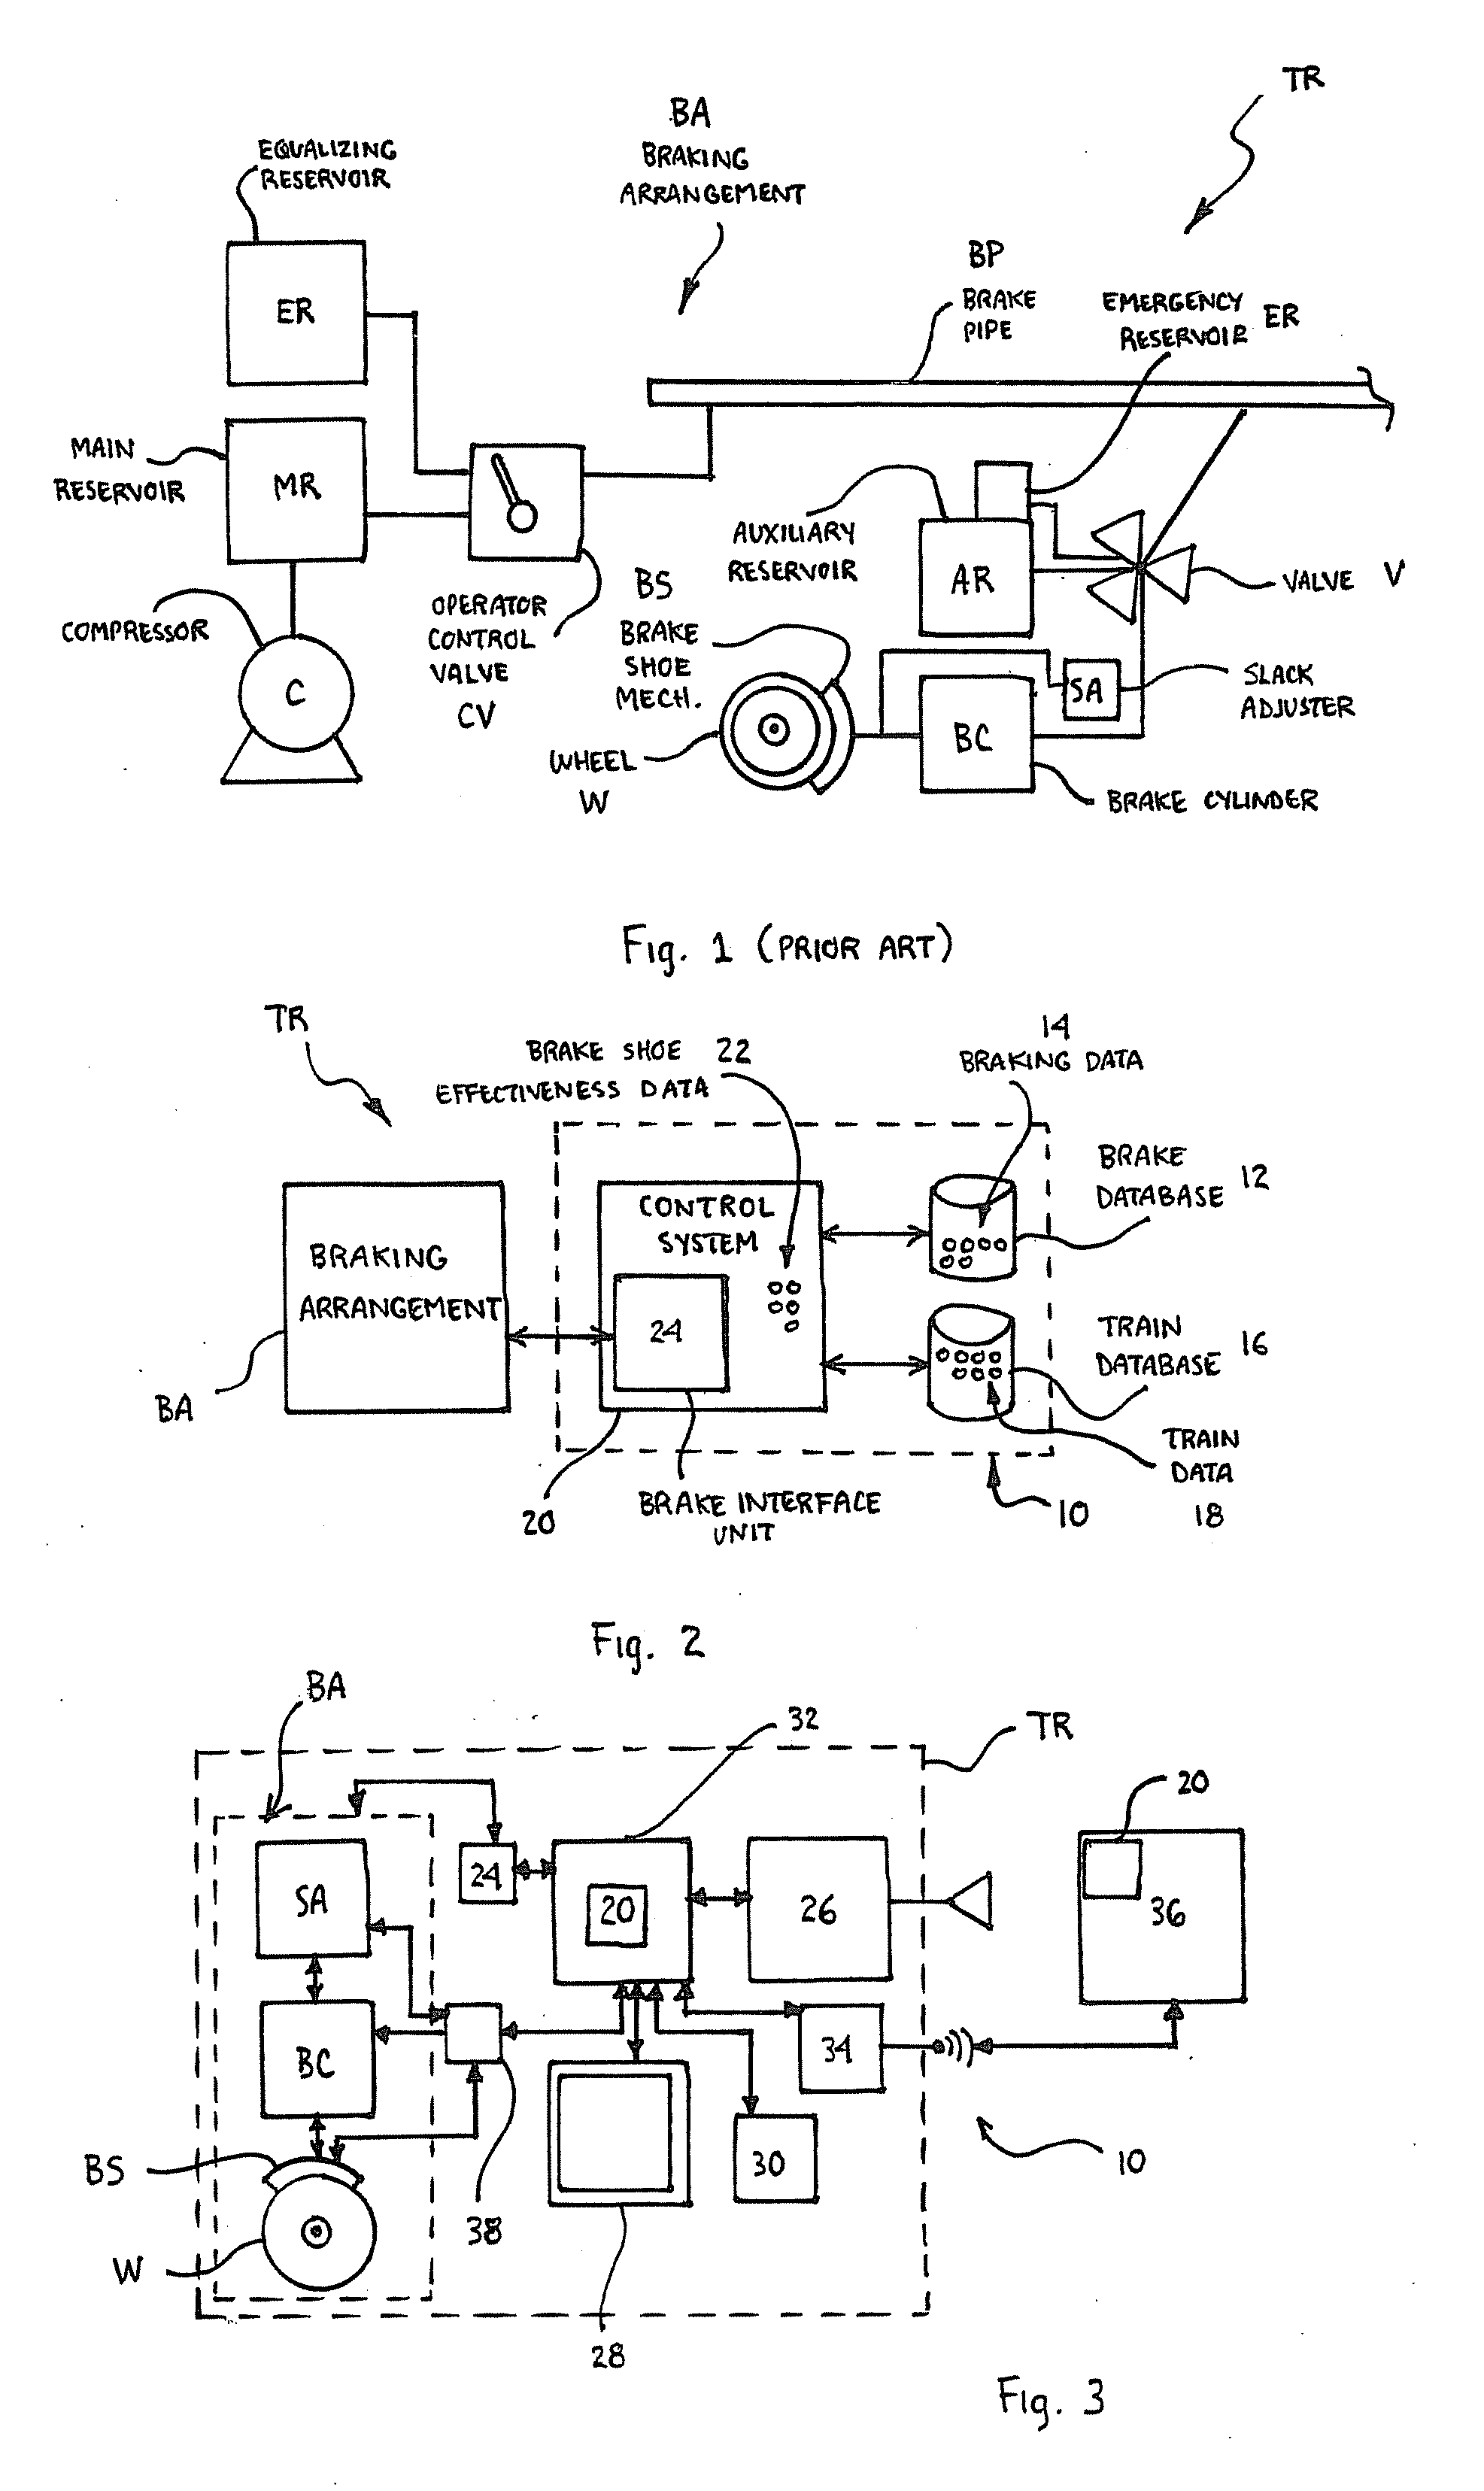 Method and System for Determining Brake Shoe Effectiveness